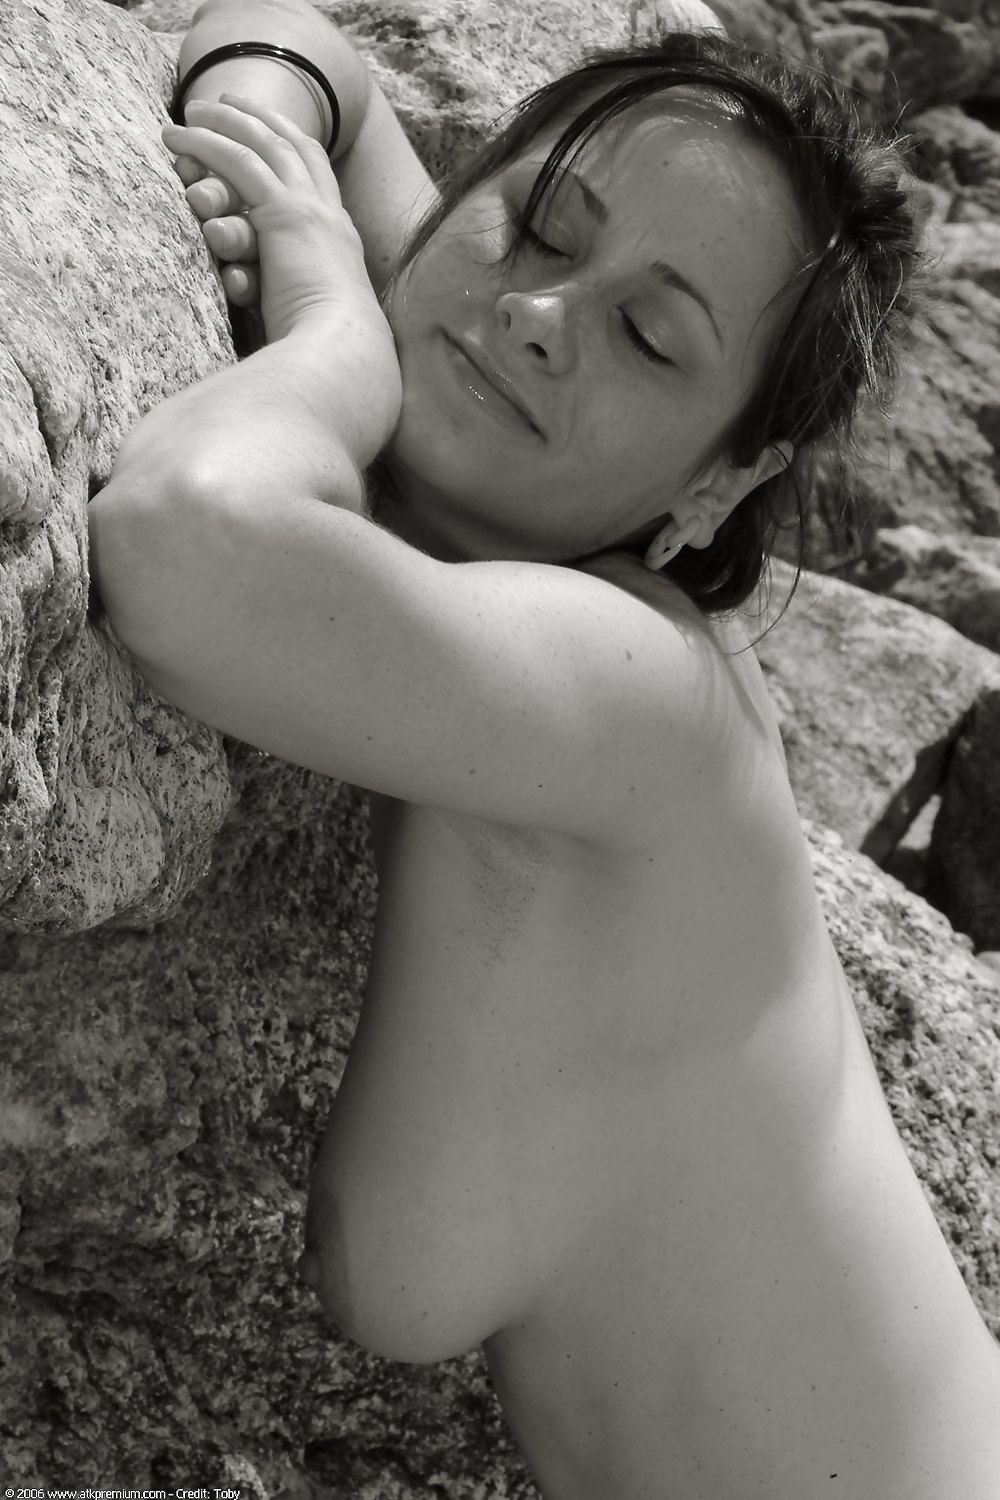 XXX young girl posing at beach - black and white